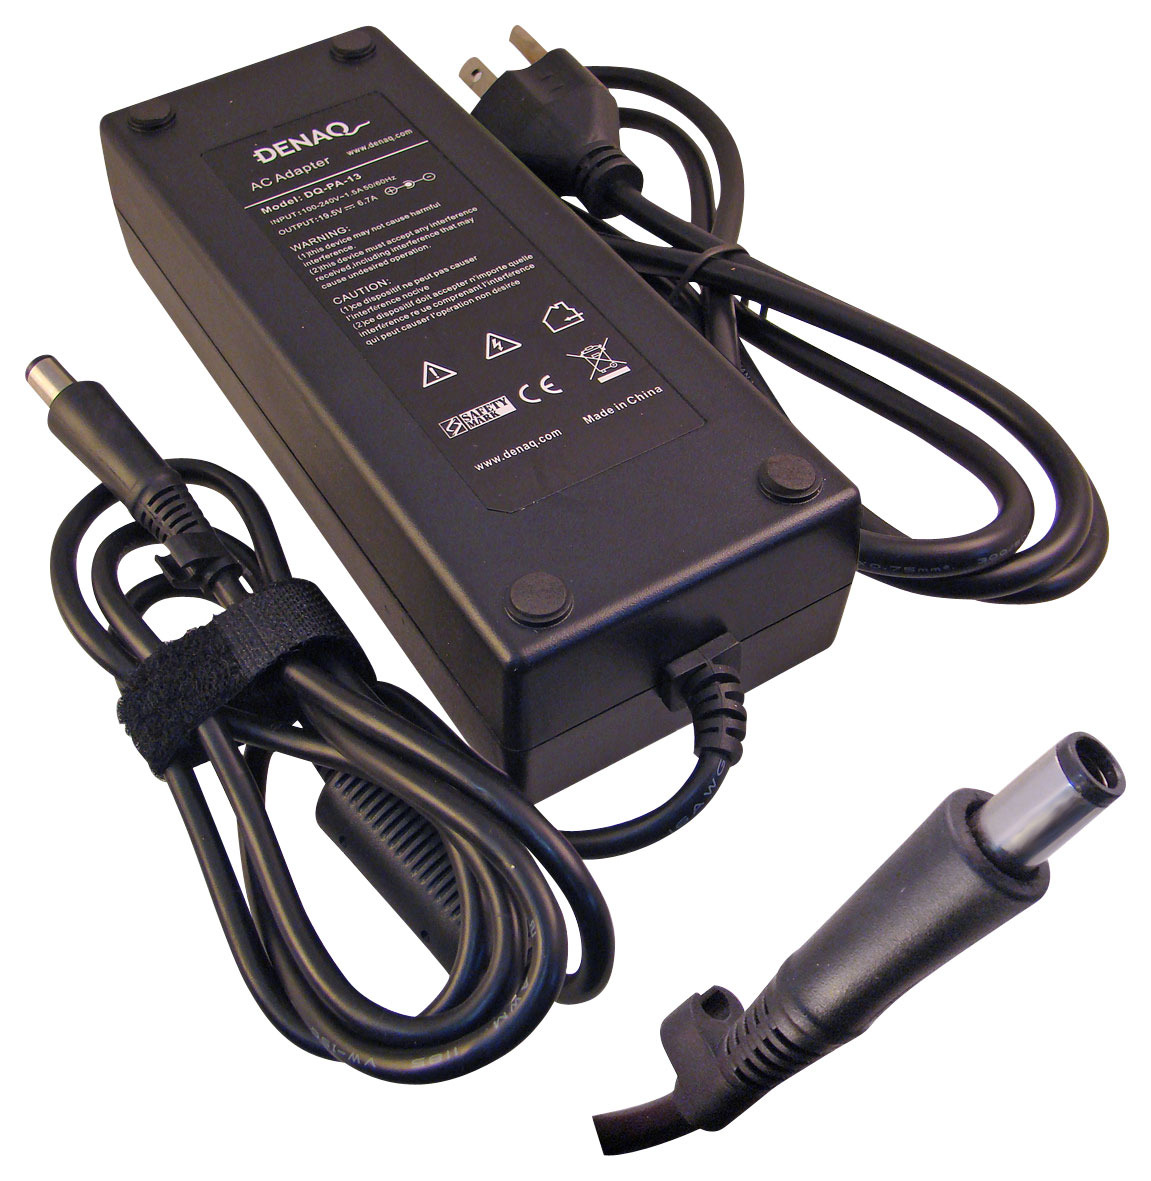 Antecedent Communicatie netwerk Hectare DENAQ AC Power Adapter and Charger for Select Dell Precision, Inspiron and  XPS Laptops Black DQ-PA-13-7450 - Best Buy